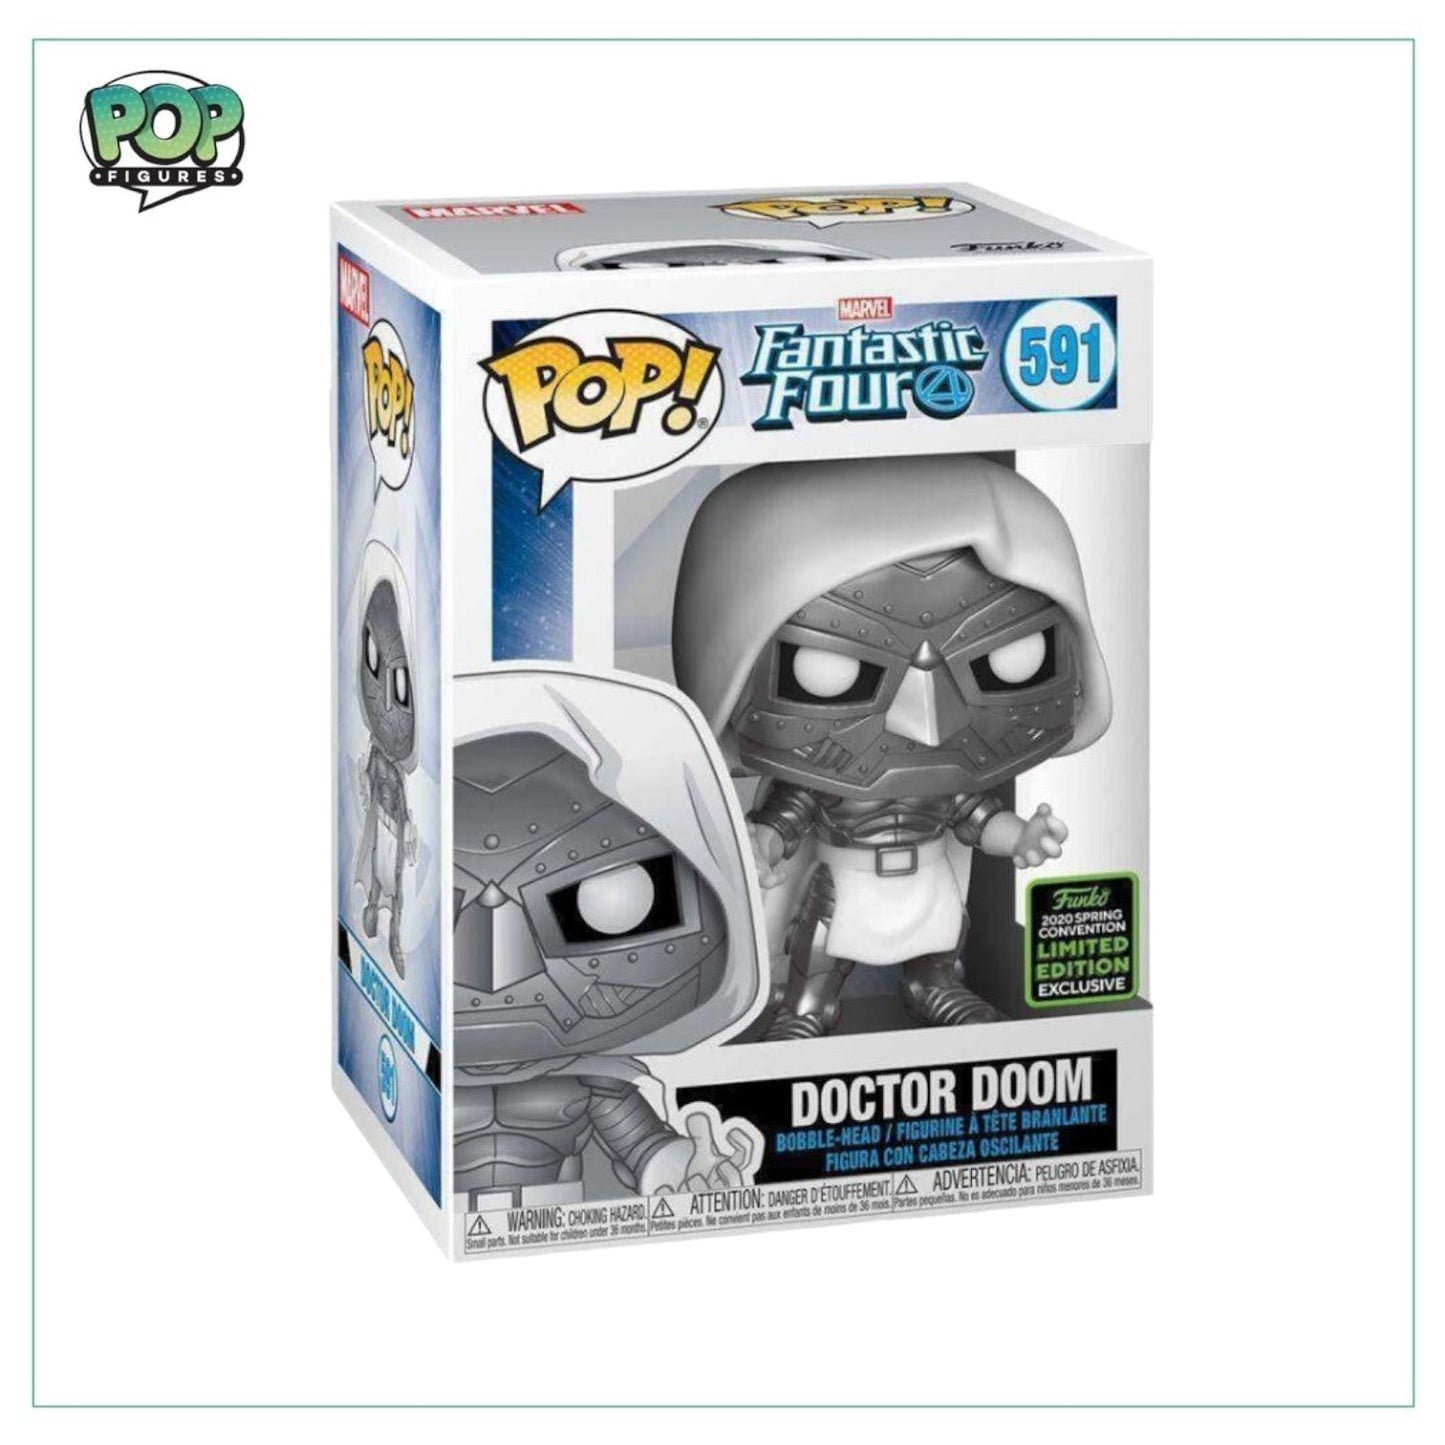 Doctor Doom #591 Funko Pop! - Fantastic Four - Shared Official 2020 Spring Convention Exclusive - Angry Cat